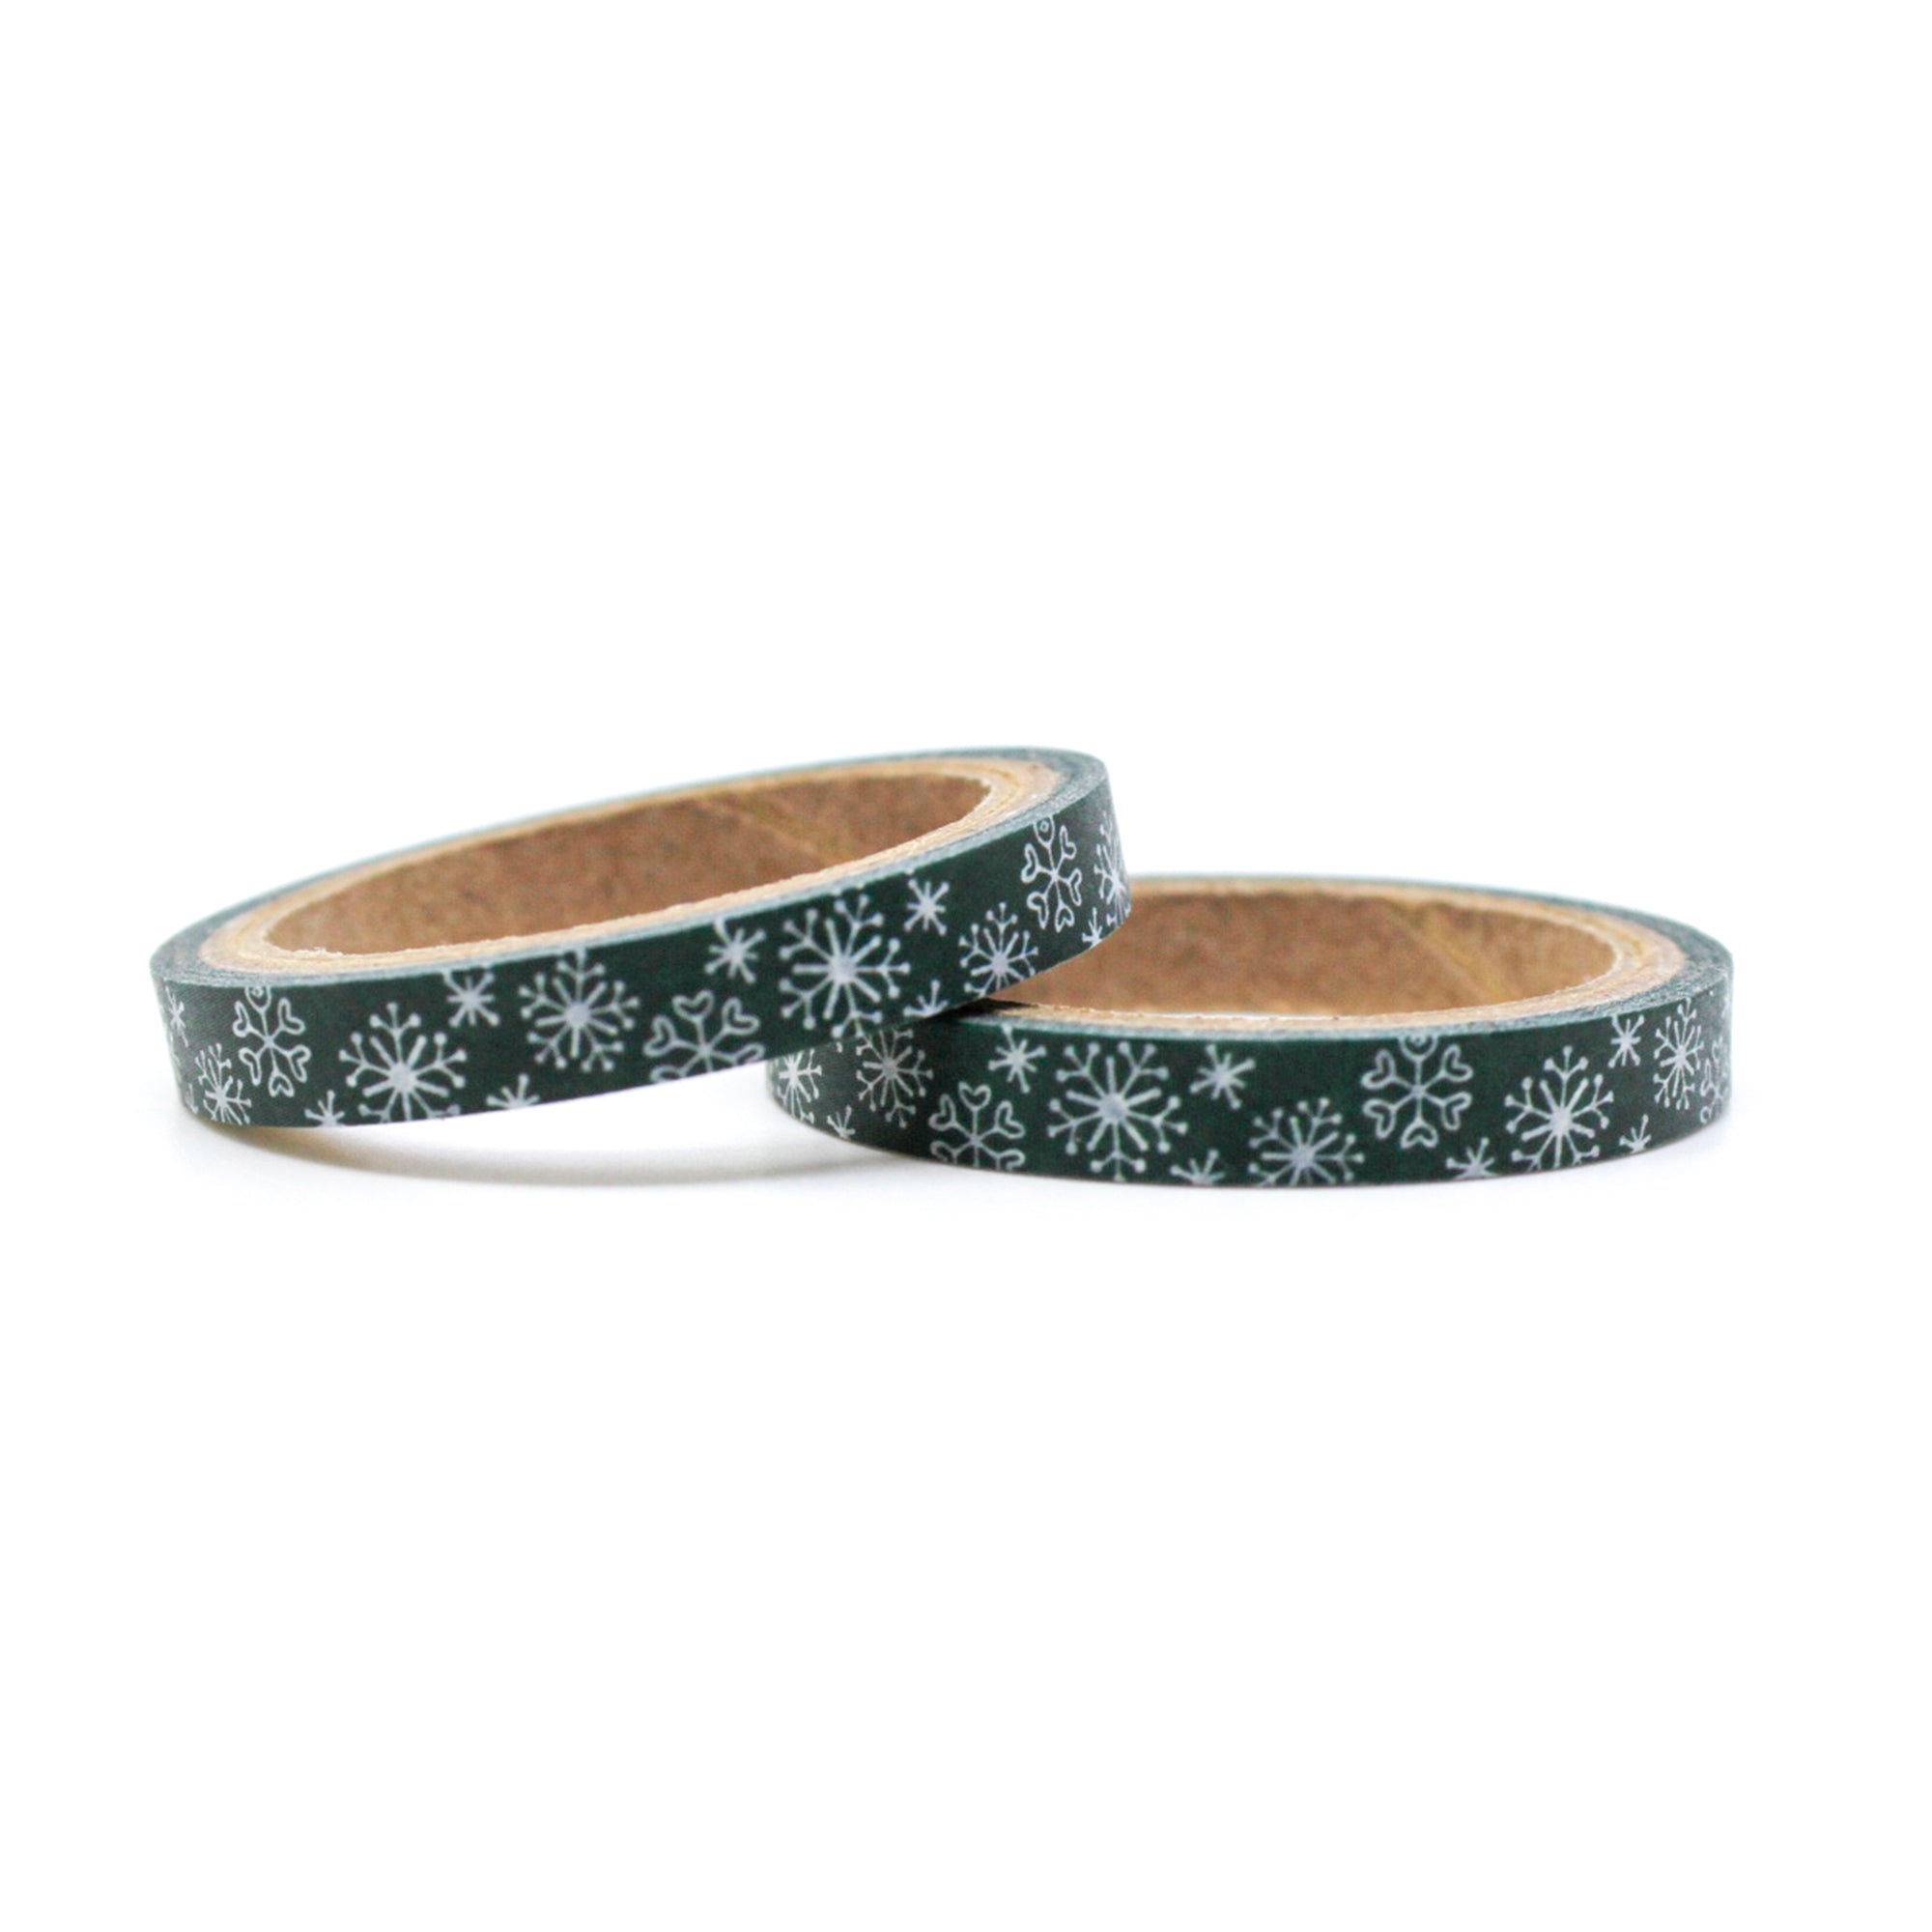 Elevate your winter crafts with our green snowflake washi tape, featuring intricate snowflake designs in a refreshing shade of green, perfect for adding a touch of seasonal wonder to your projects. This tape is sold at BBB Supplies Craft Shop.